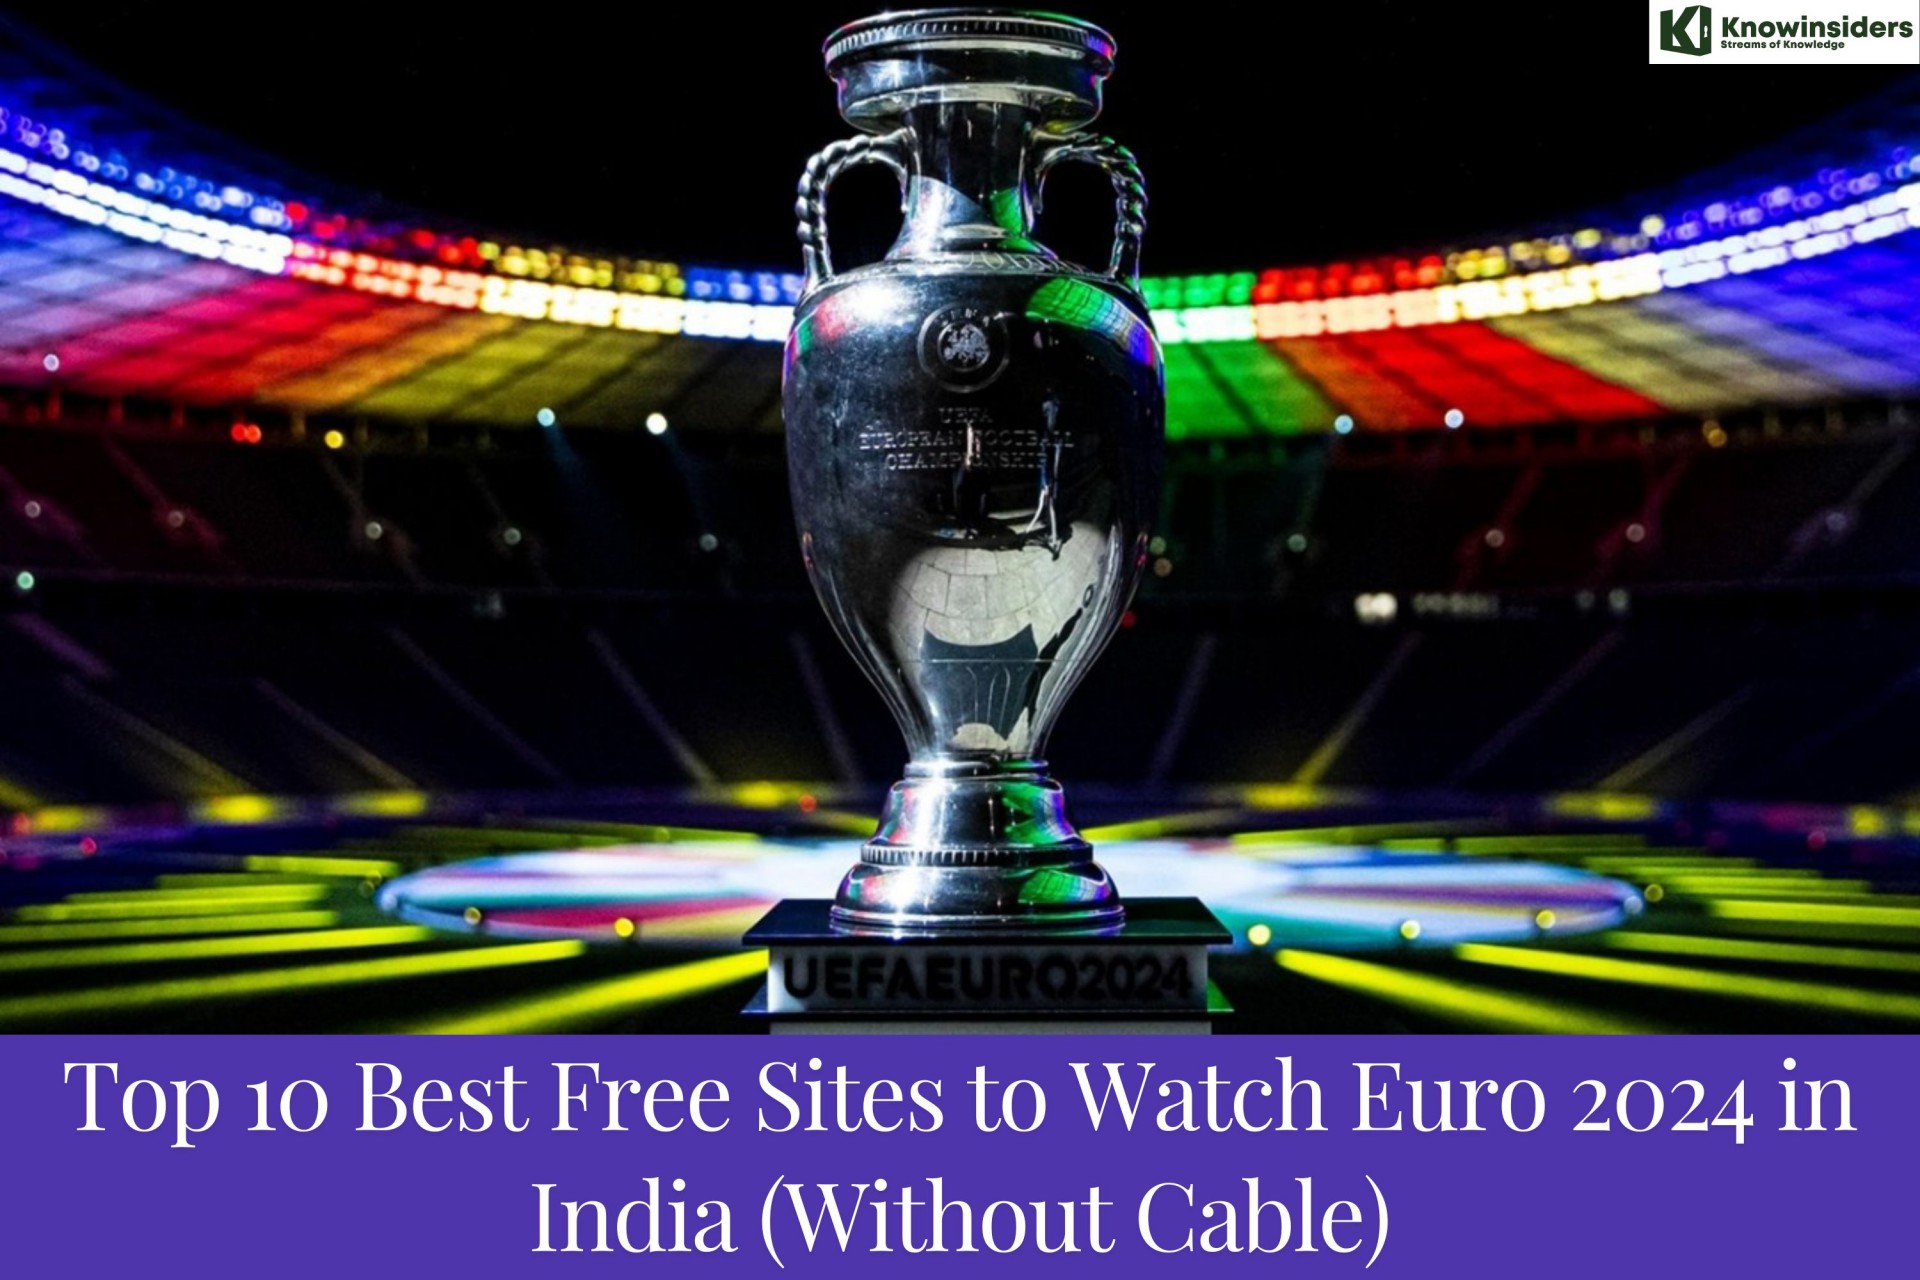 10 Best FREE Sites to Watch Euro 2024 in India (Without Cable)